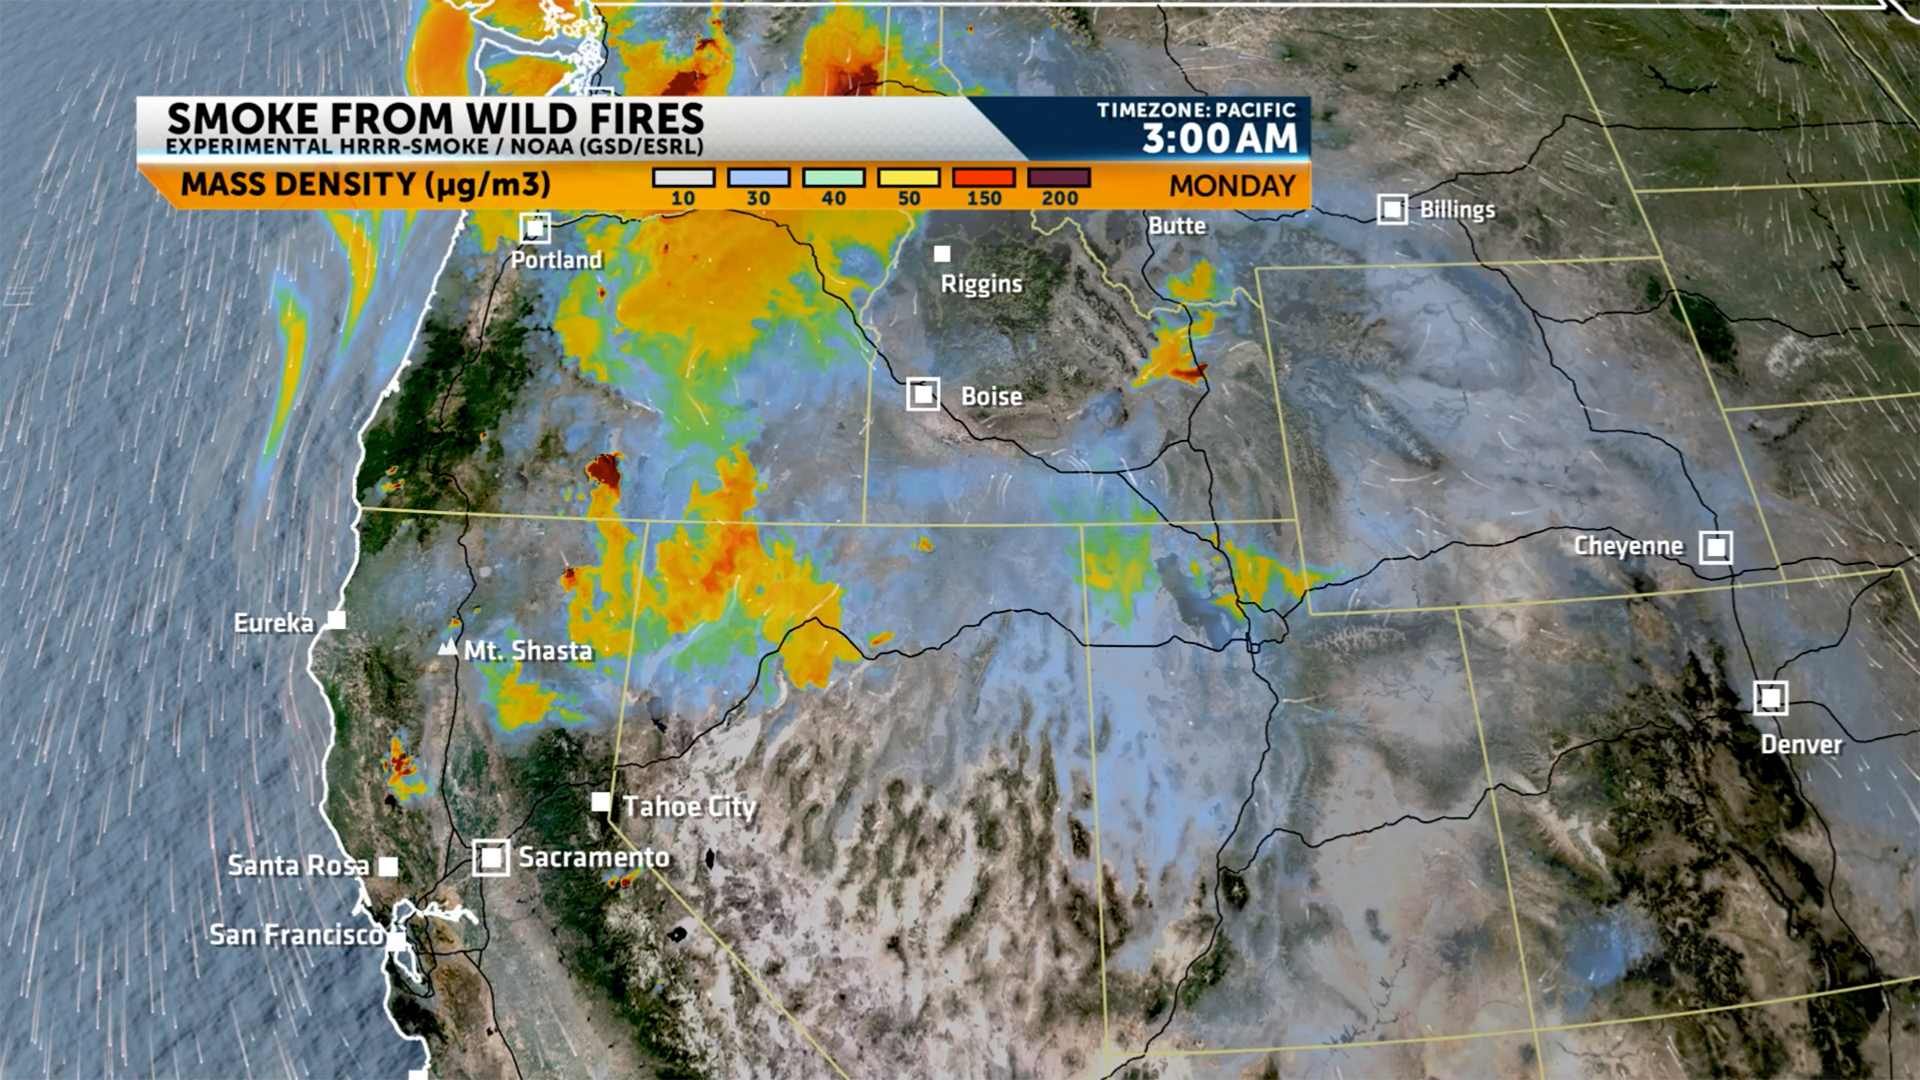 An example of a wild fire graphic powered by the National Weather Service